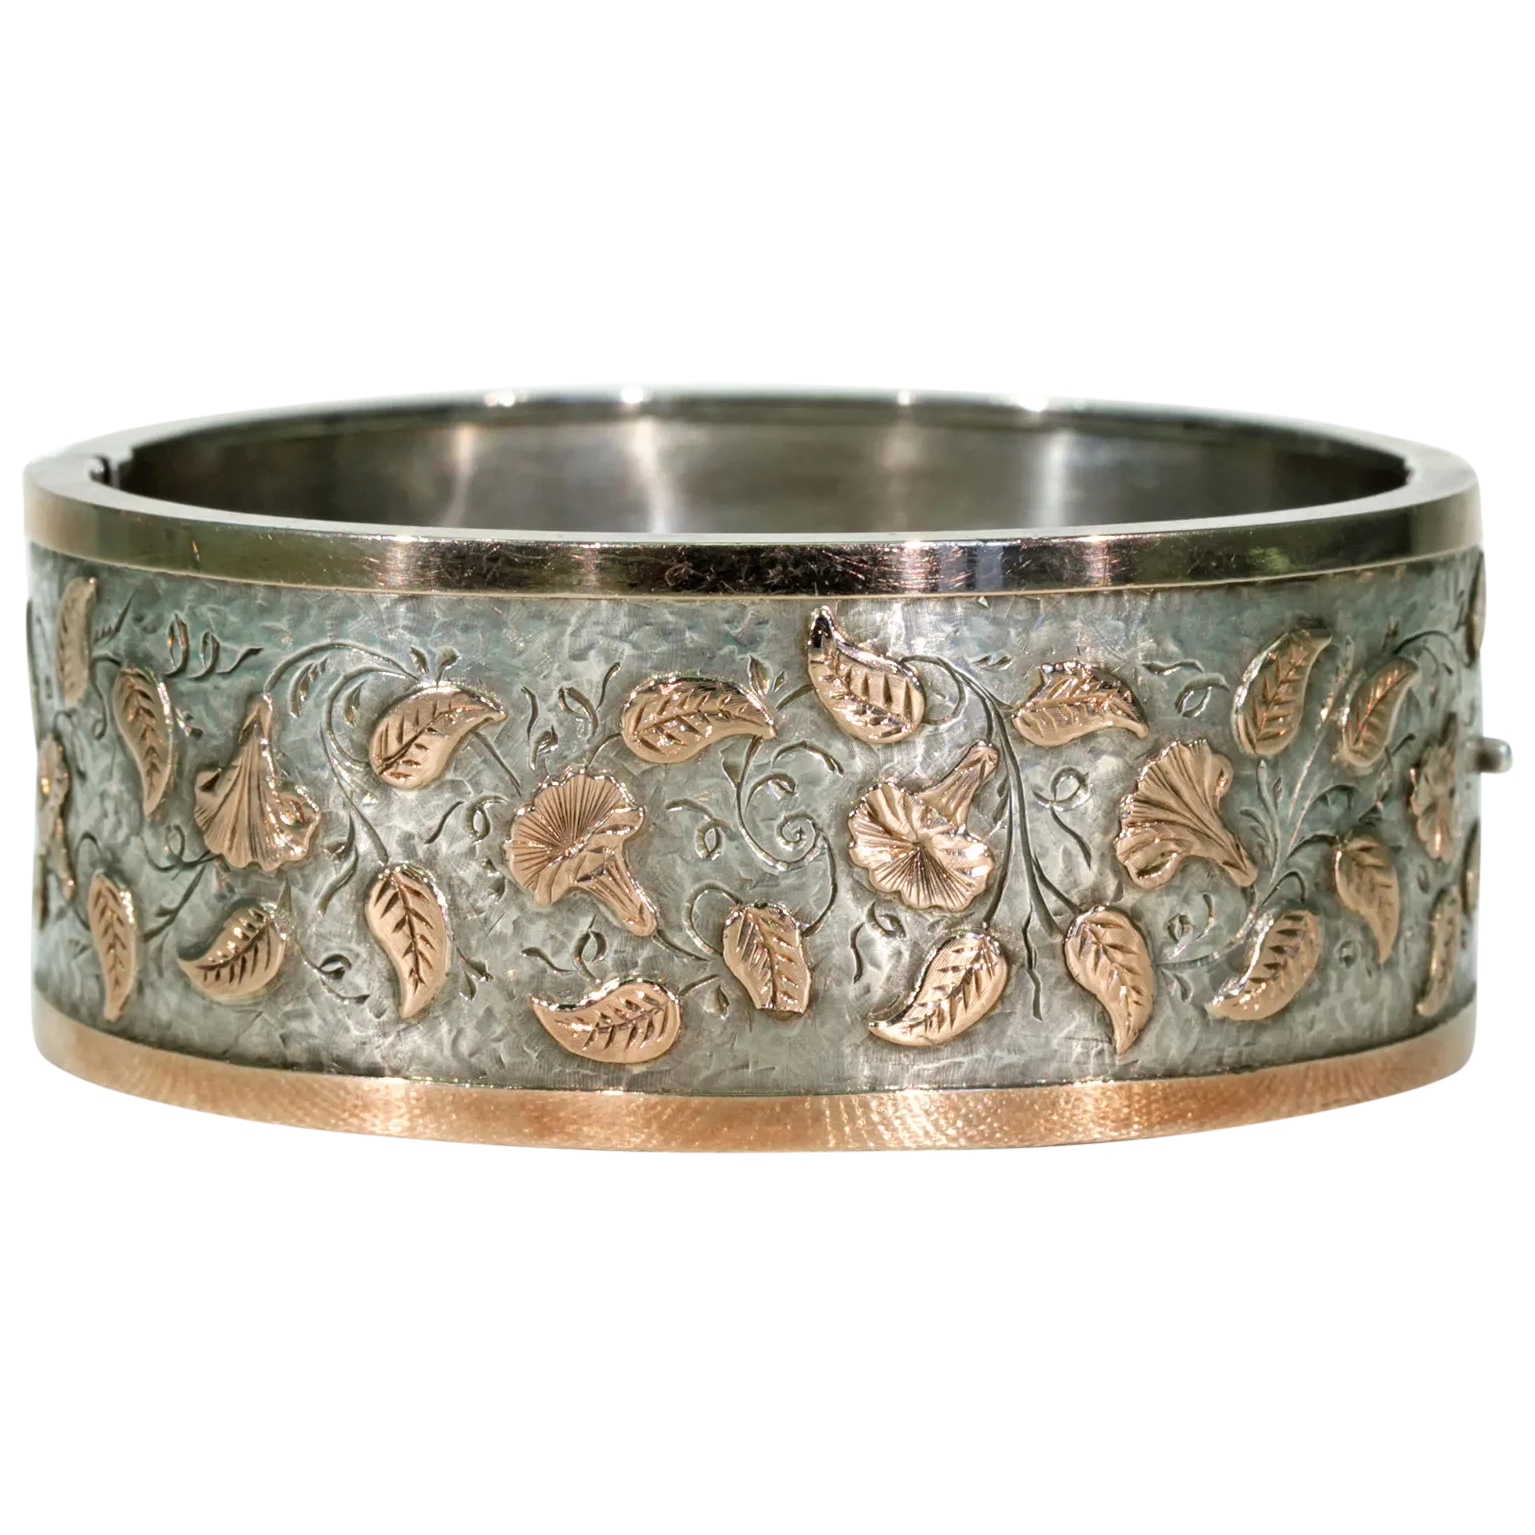 Victorian Morning Glory Silver Bangle Bracelet Gold Accents